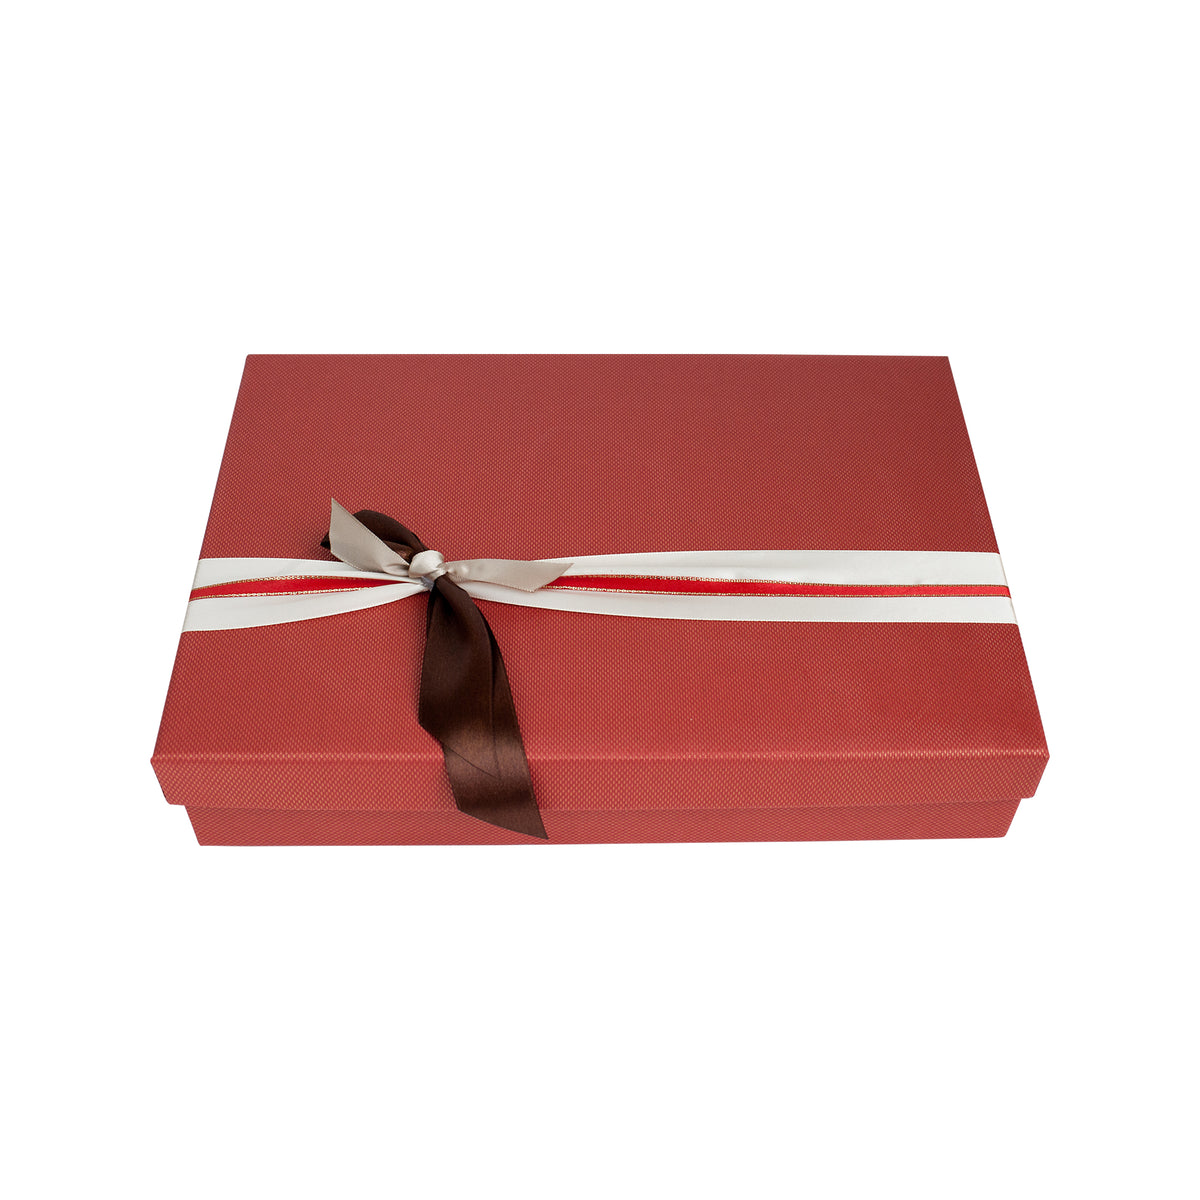 Elegant Textured Red Gift Box - Single (Sizes Available)